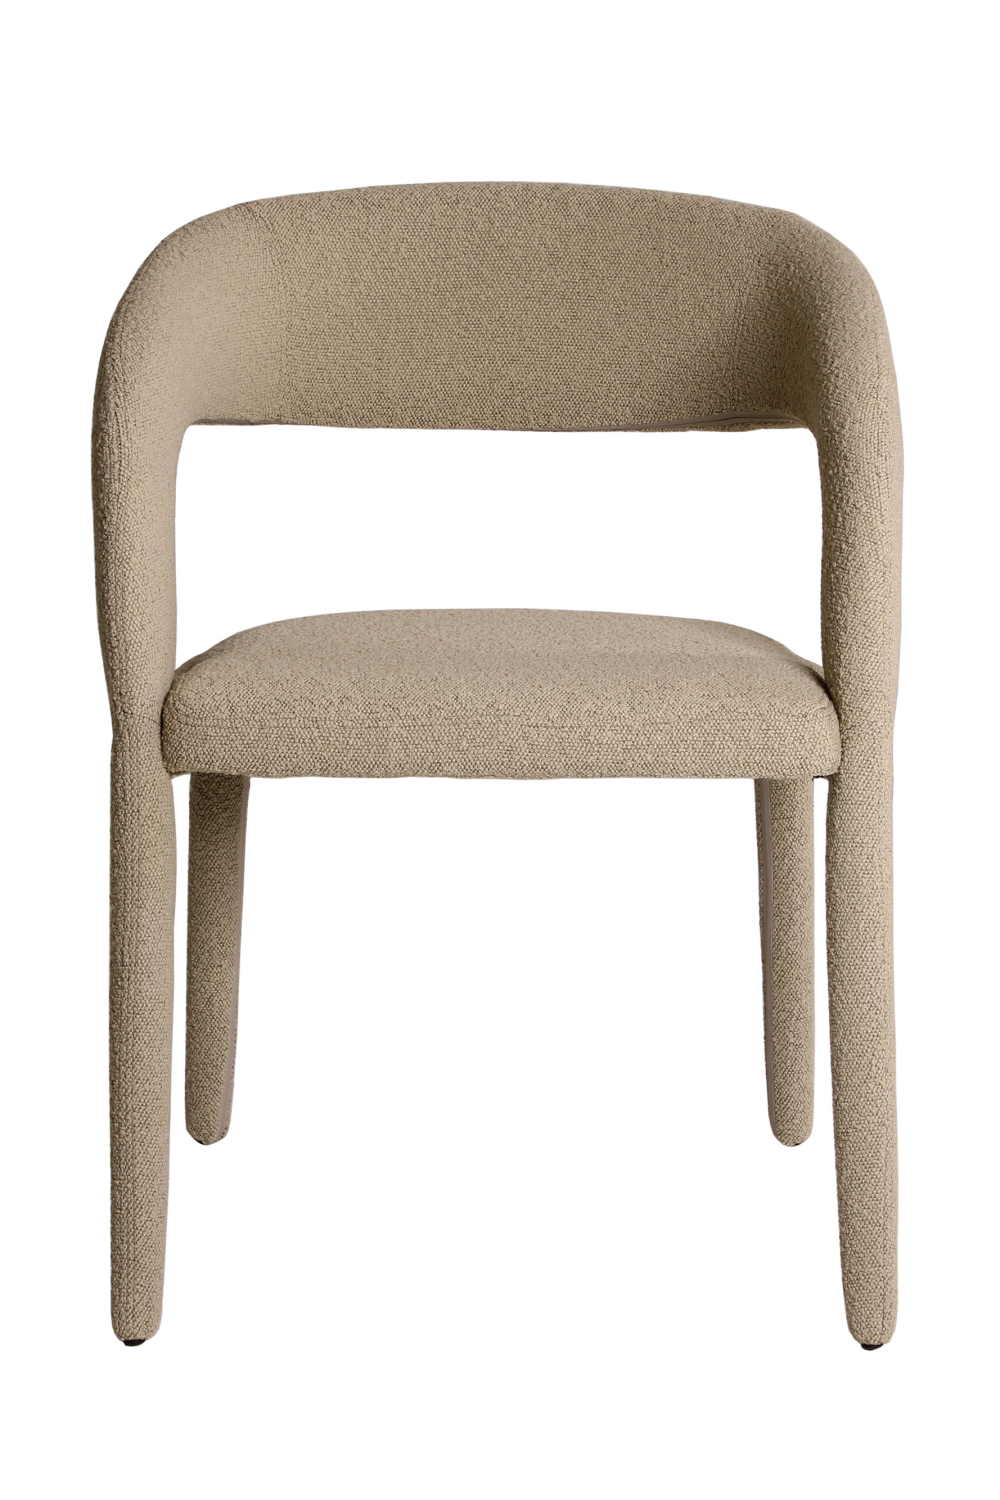 Beige Bouclé Curved Dining Chair | Andrew Martin Knox | Oroa.com